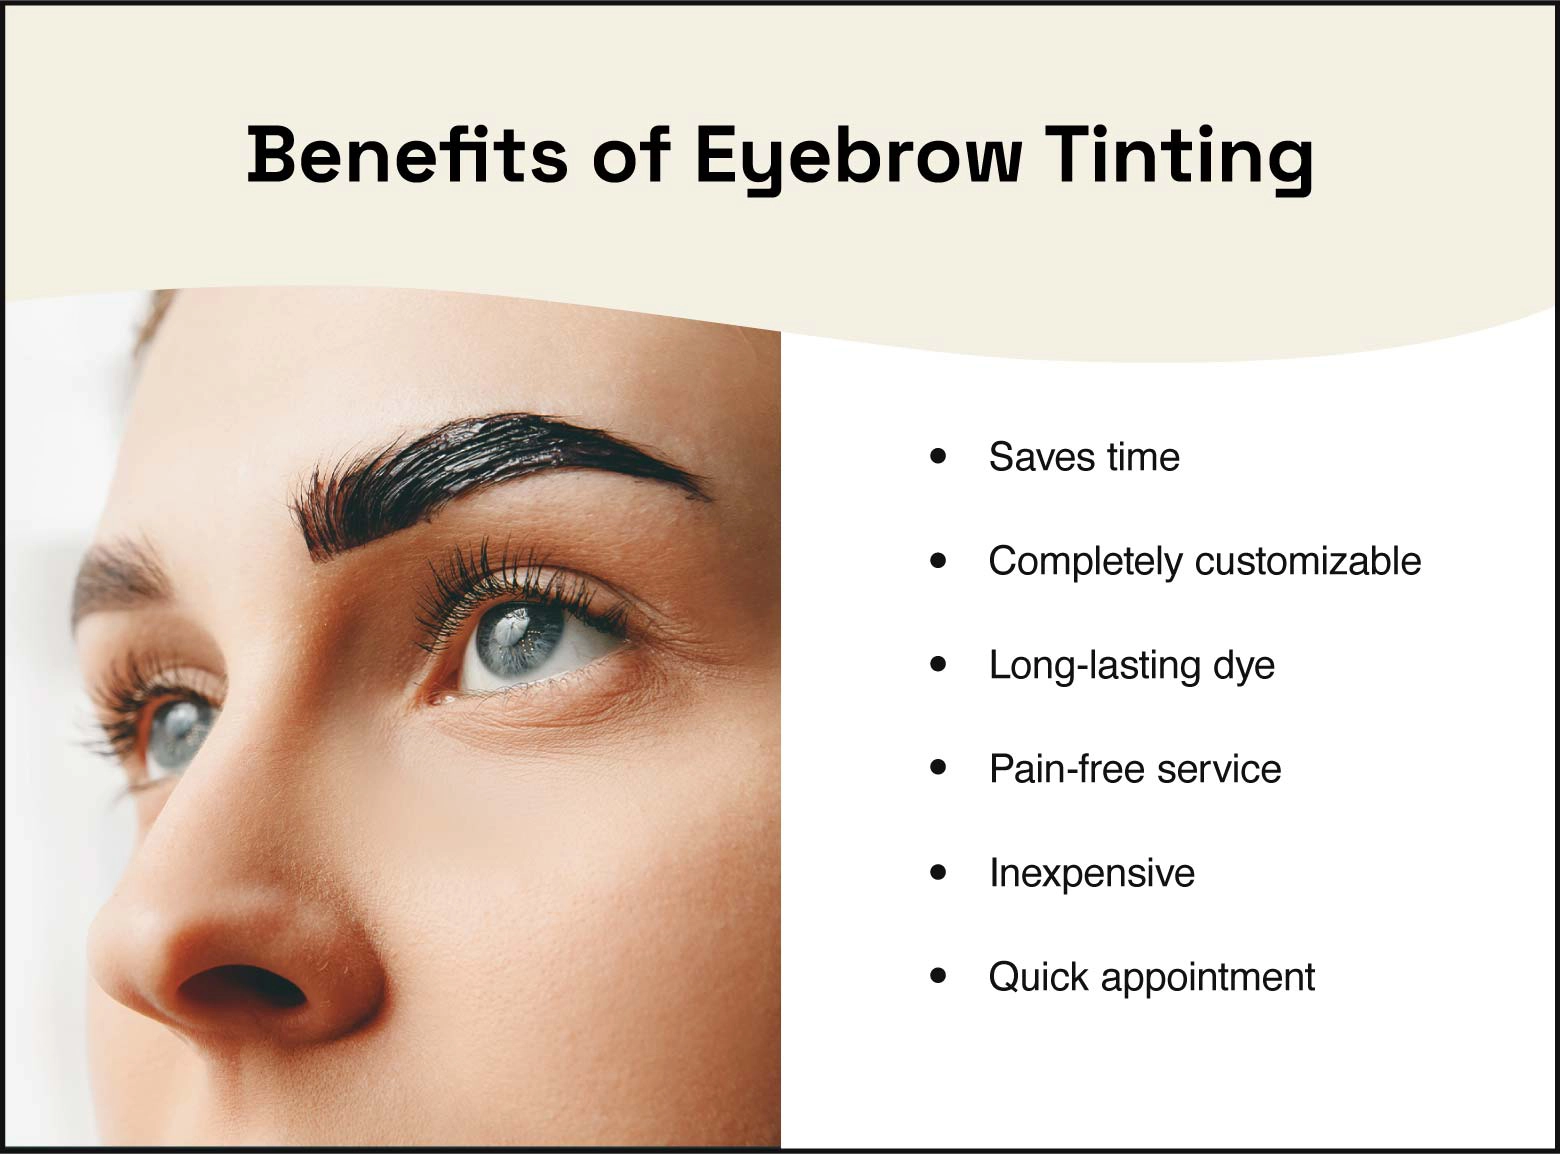 Benefits of eyebrow tinting are that it saves time, is completely customizable, uses long-lasting dye, is a pain-free service, is inexpensive, and is a quick appointment.